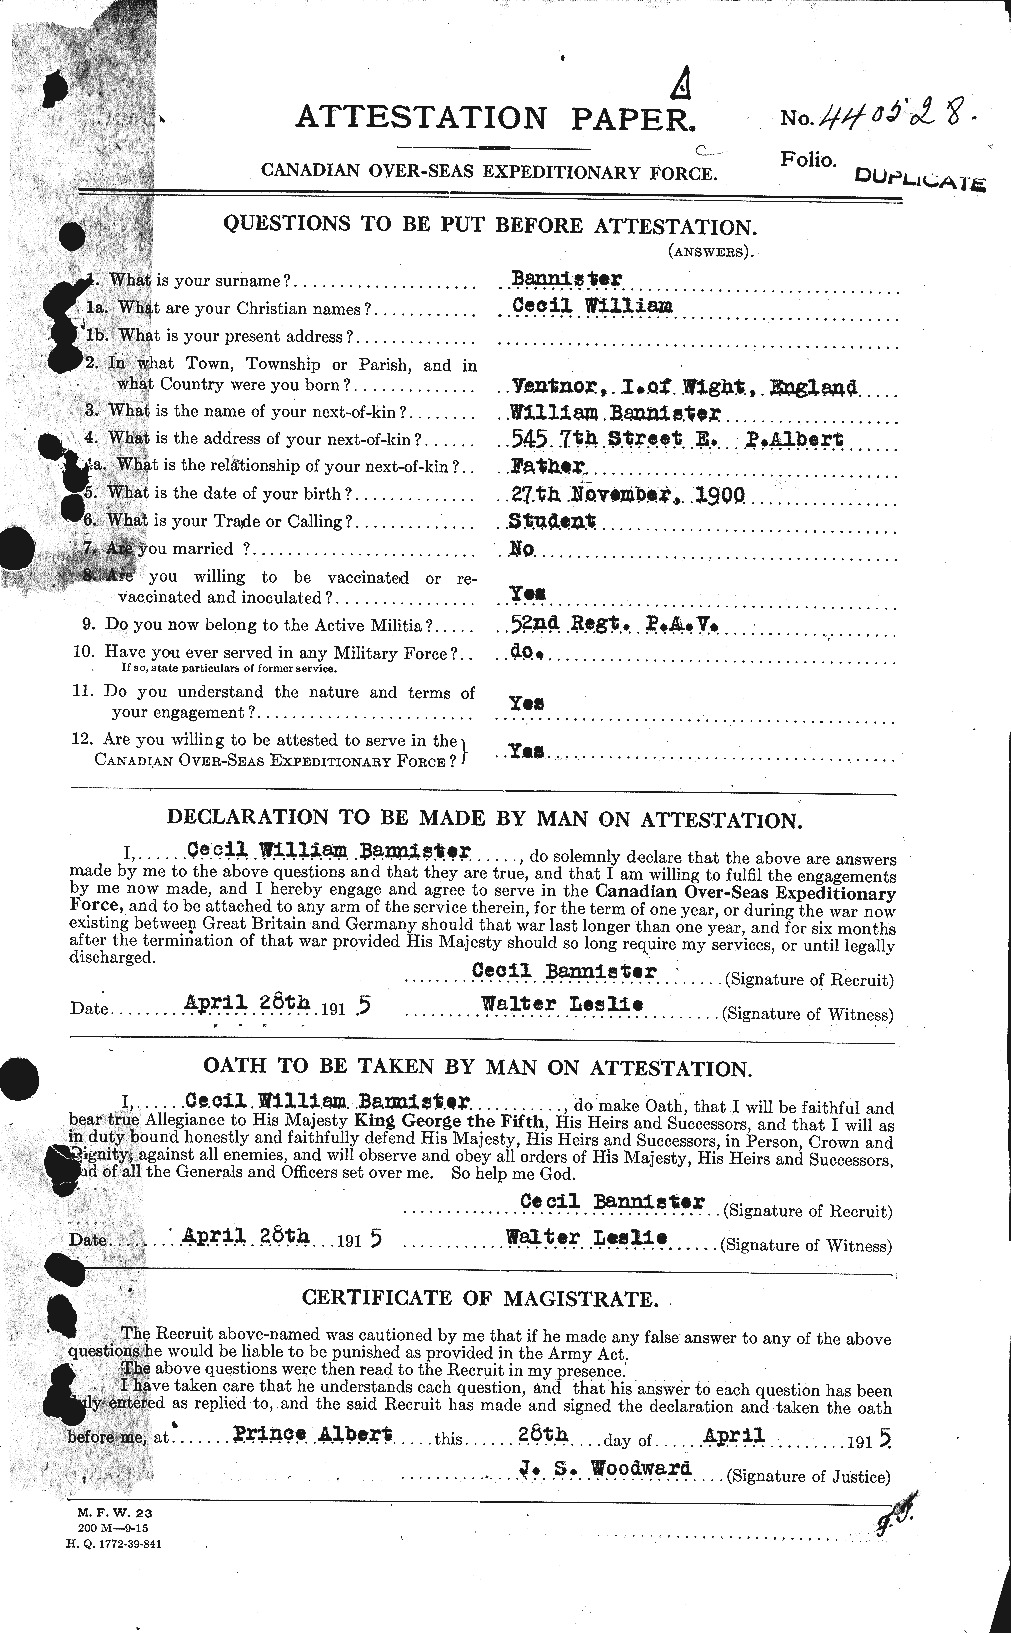 Personnel Records of the First World War - CEF 224810a